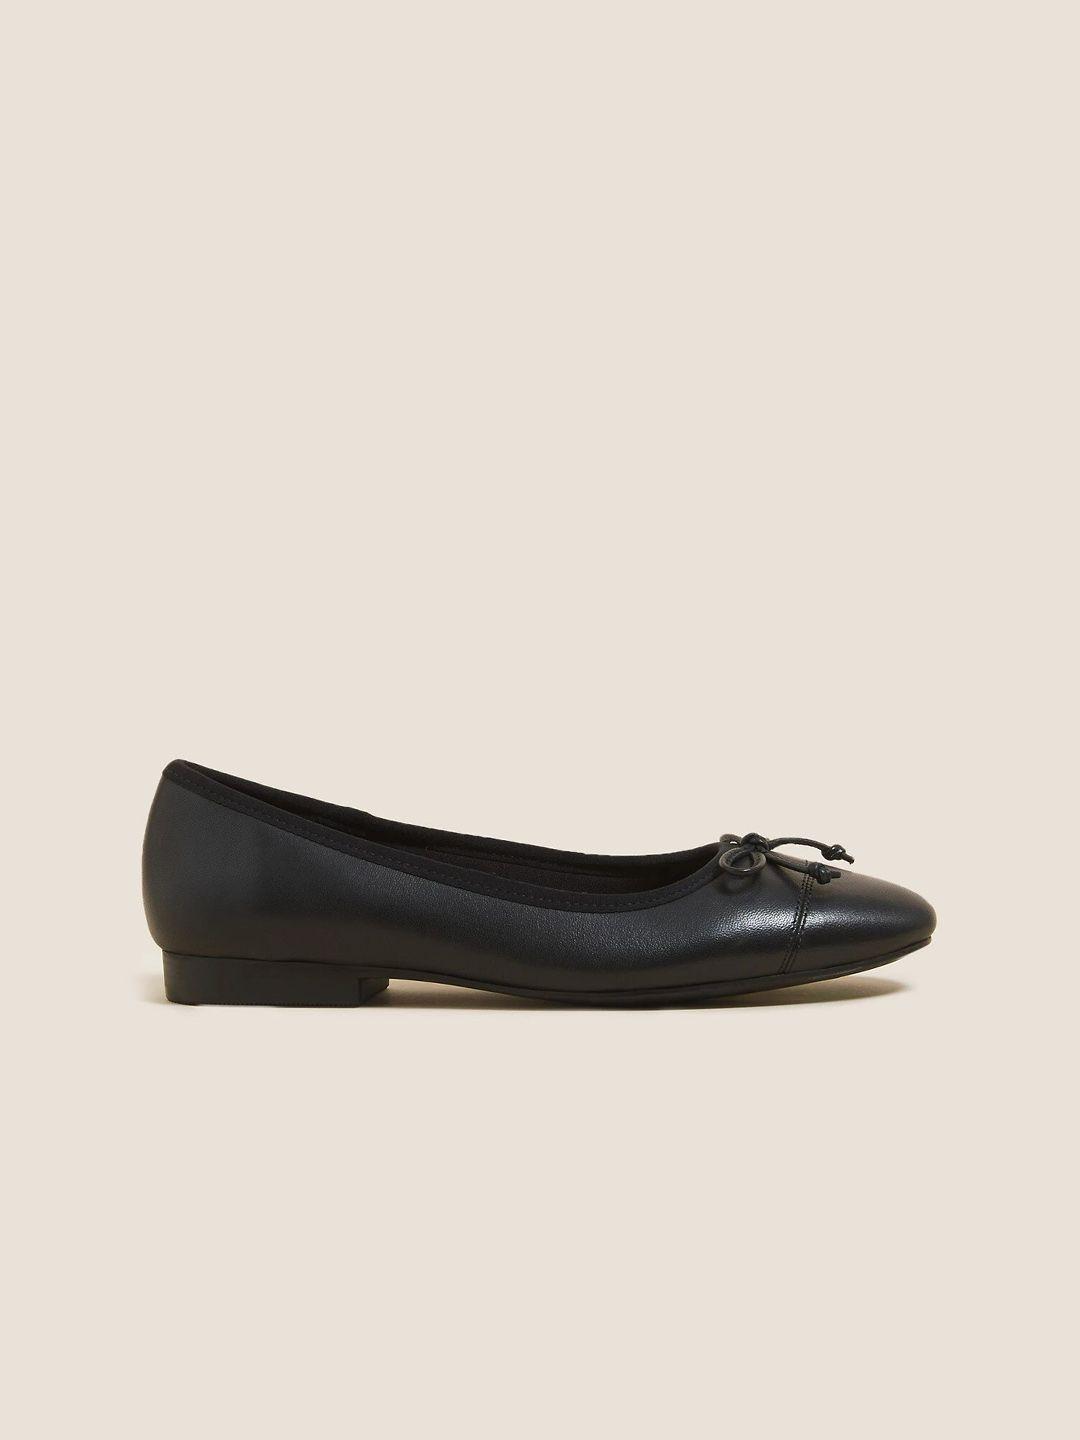 marks & spencer women black ballerinas with bows flats